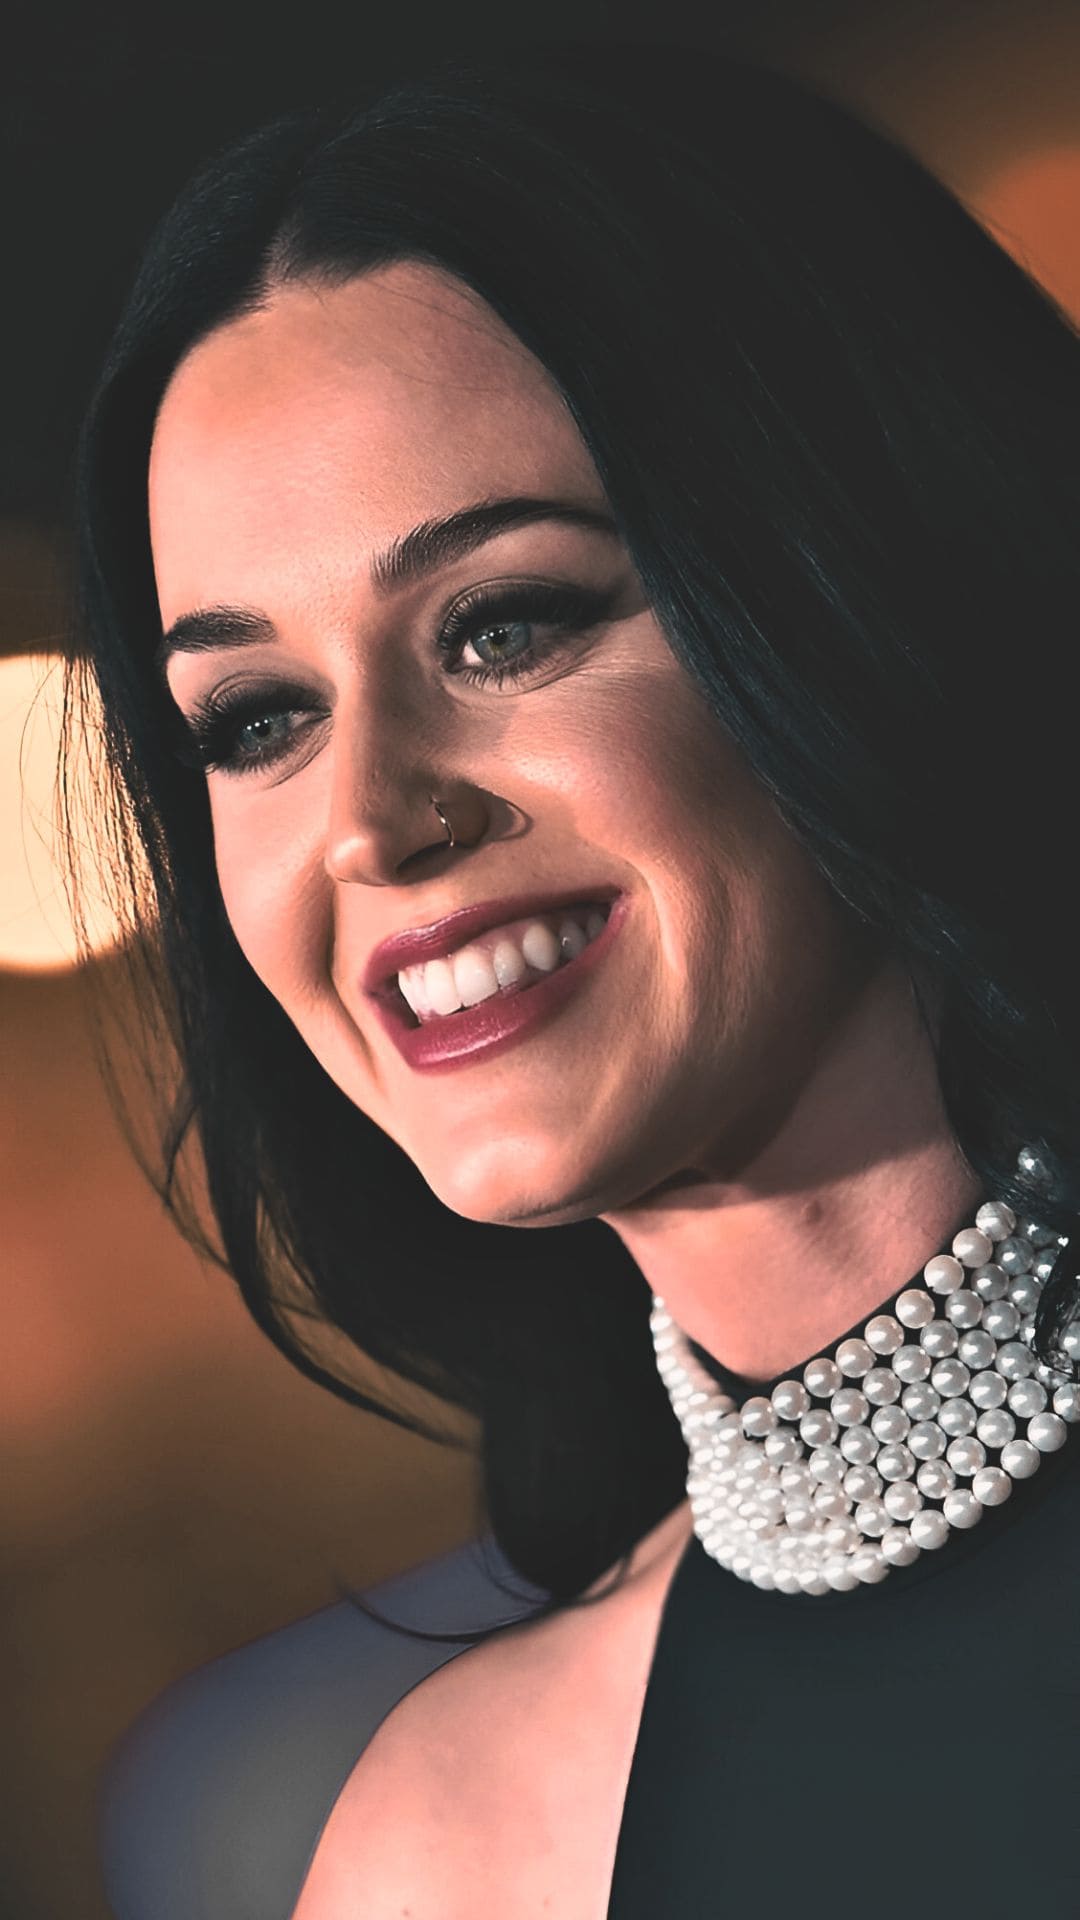 Katy Perry Wallpaper 4K For Mobile